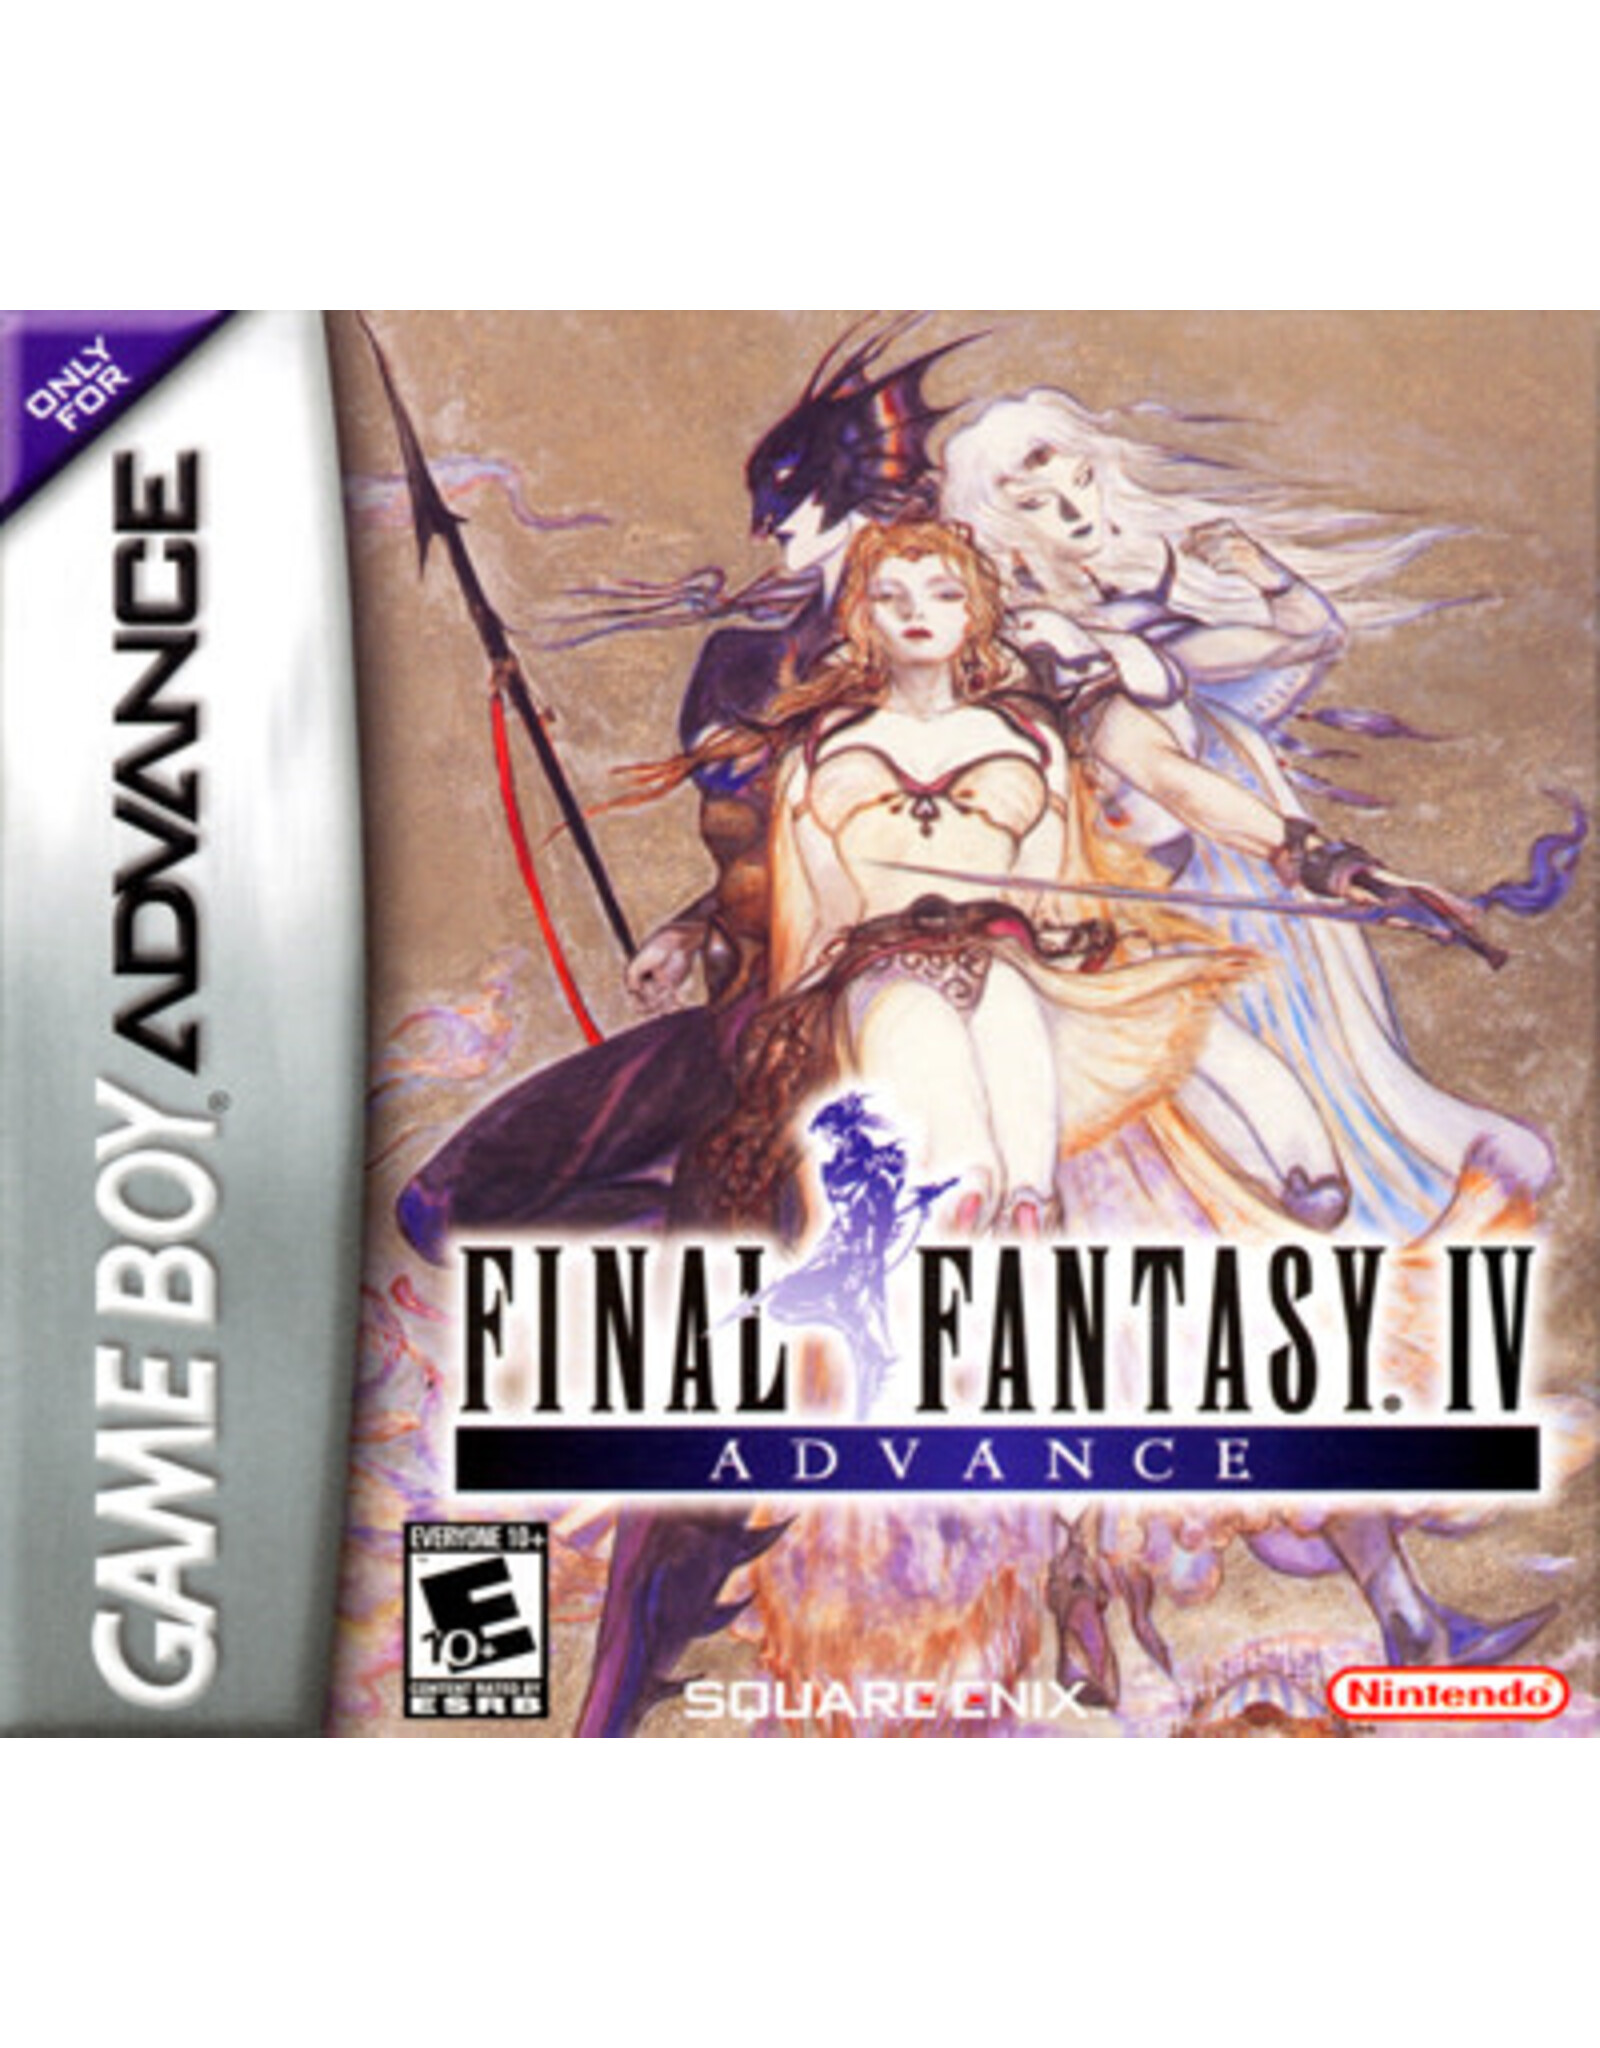 Game Boy Advance Final Fantasy IV Advance (Used, Cart Only)